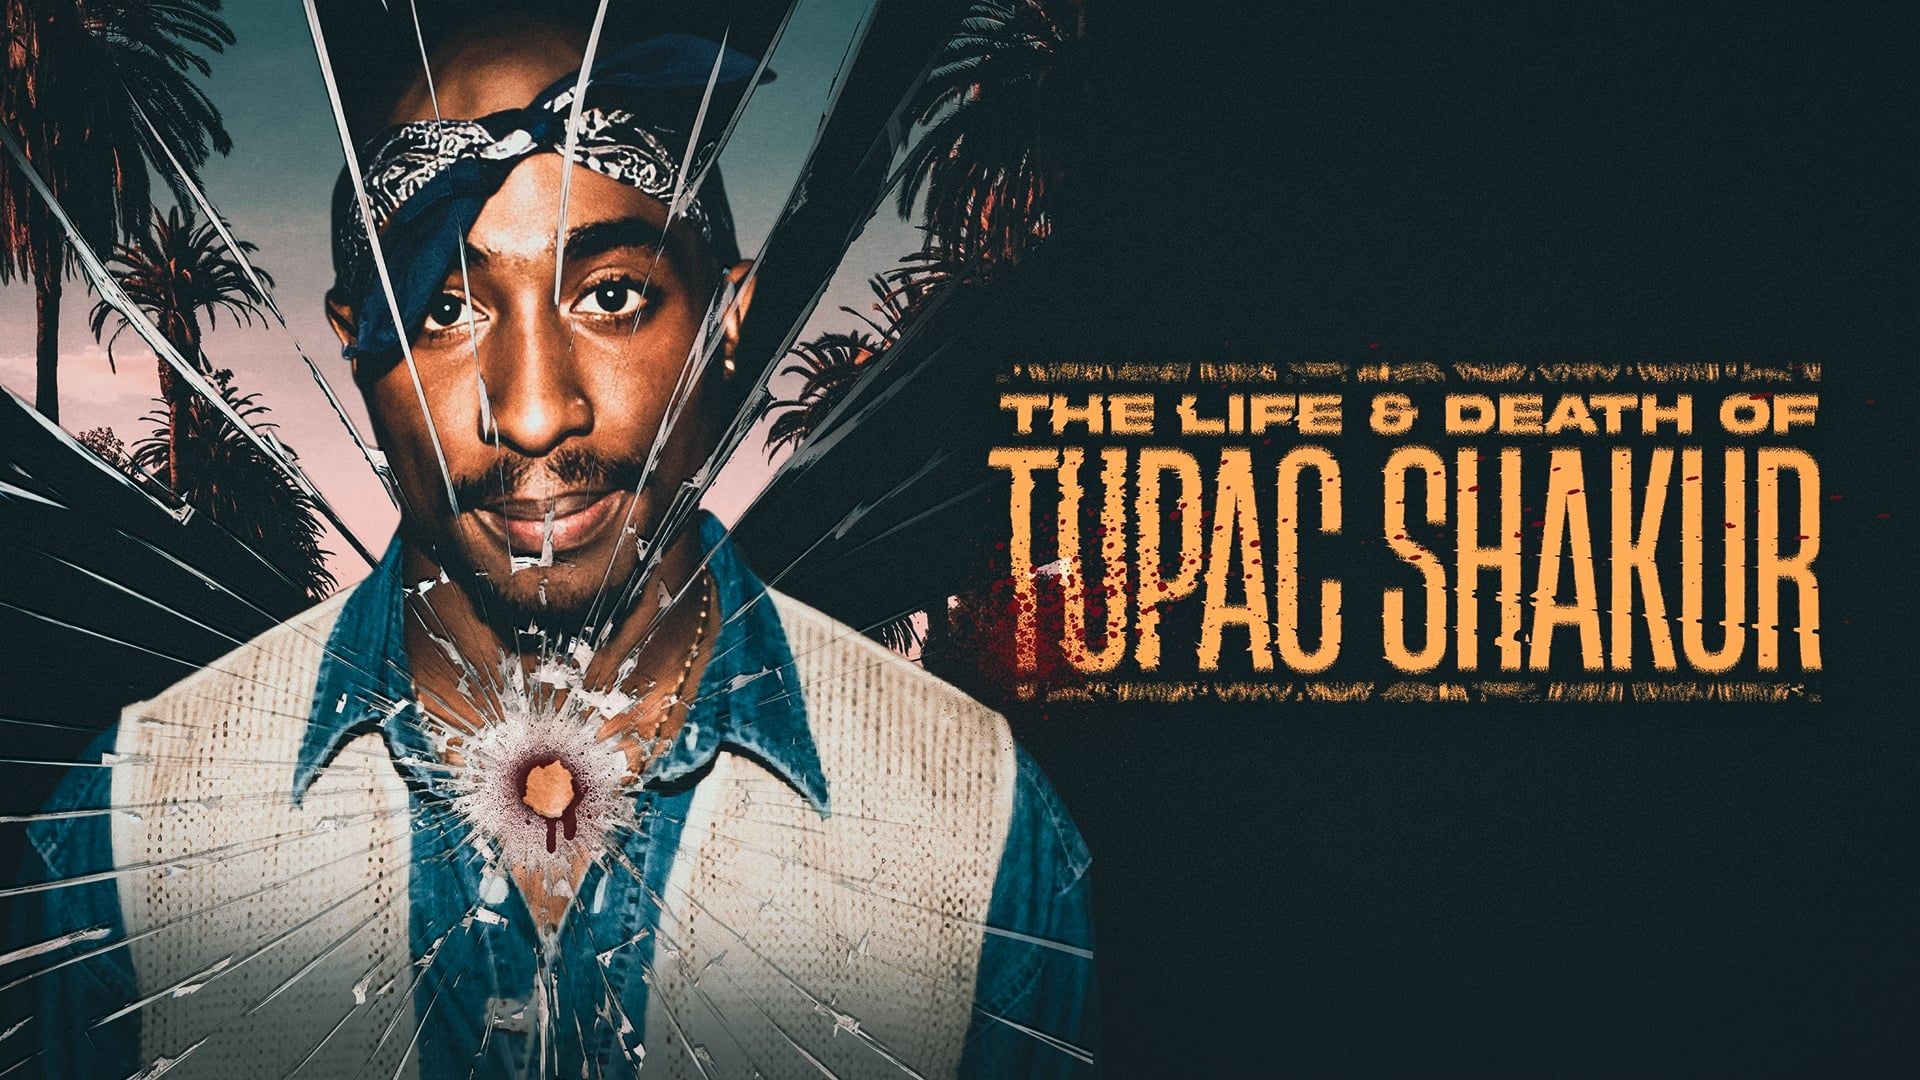 The Life & Death of Tupac Shakur background